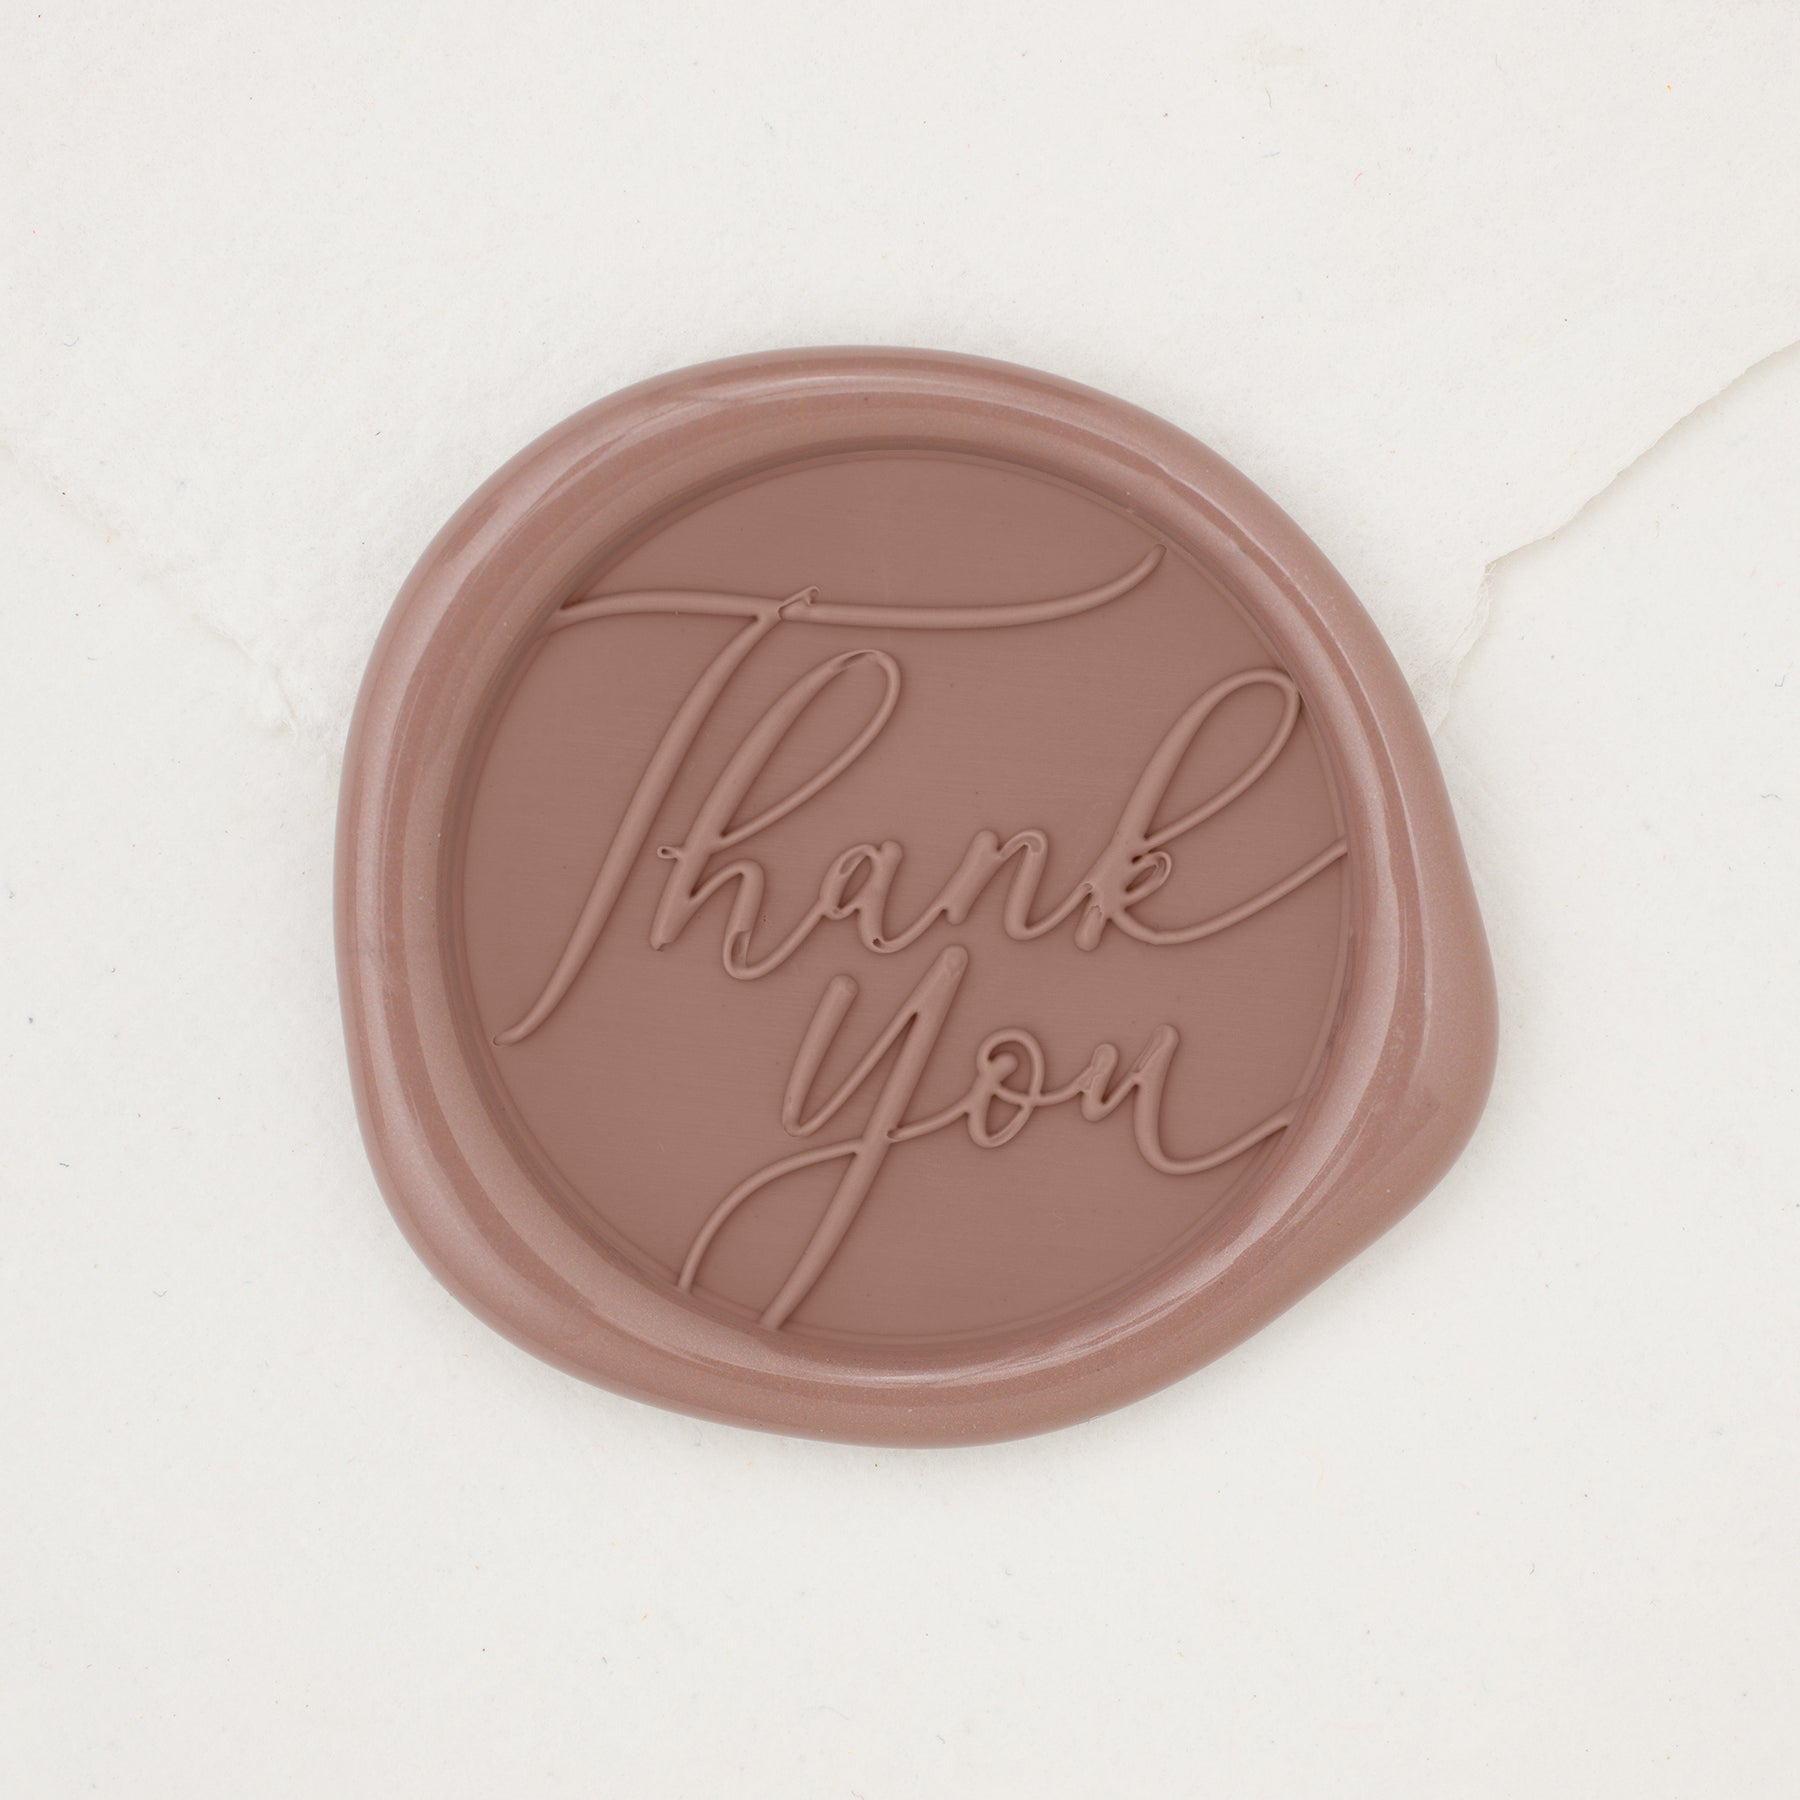 Customizable Thank You Cursive A Wax Seals, Set of 5 Wax Seals by